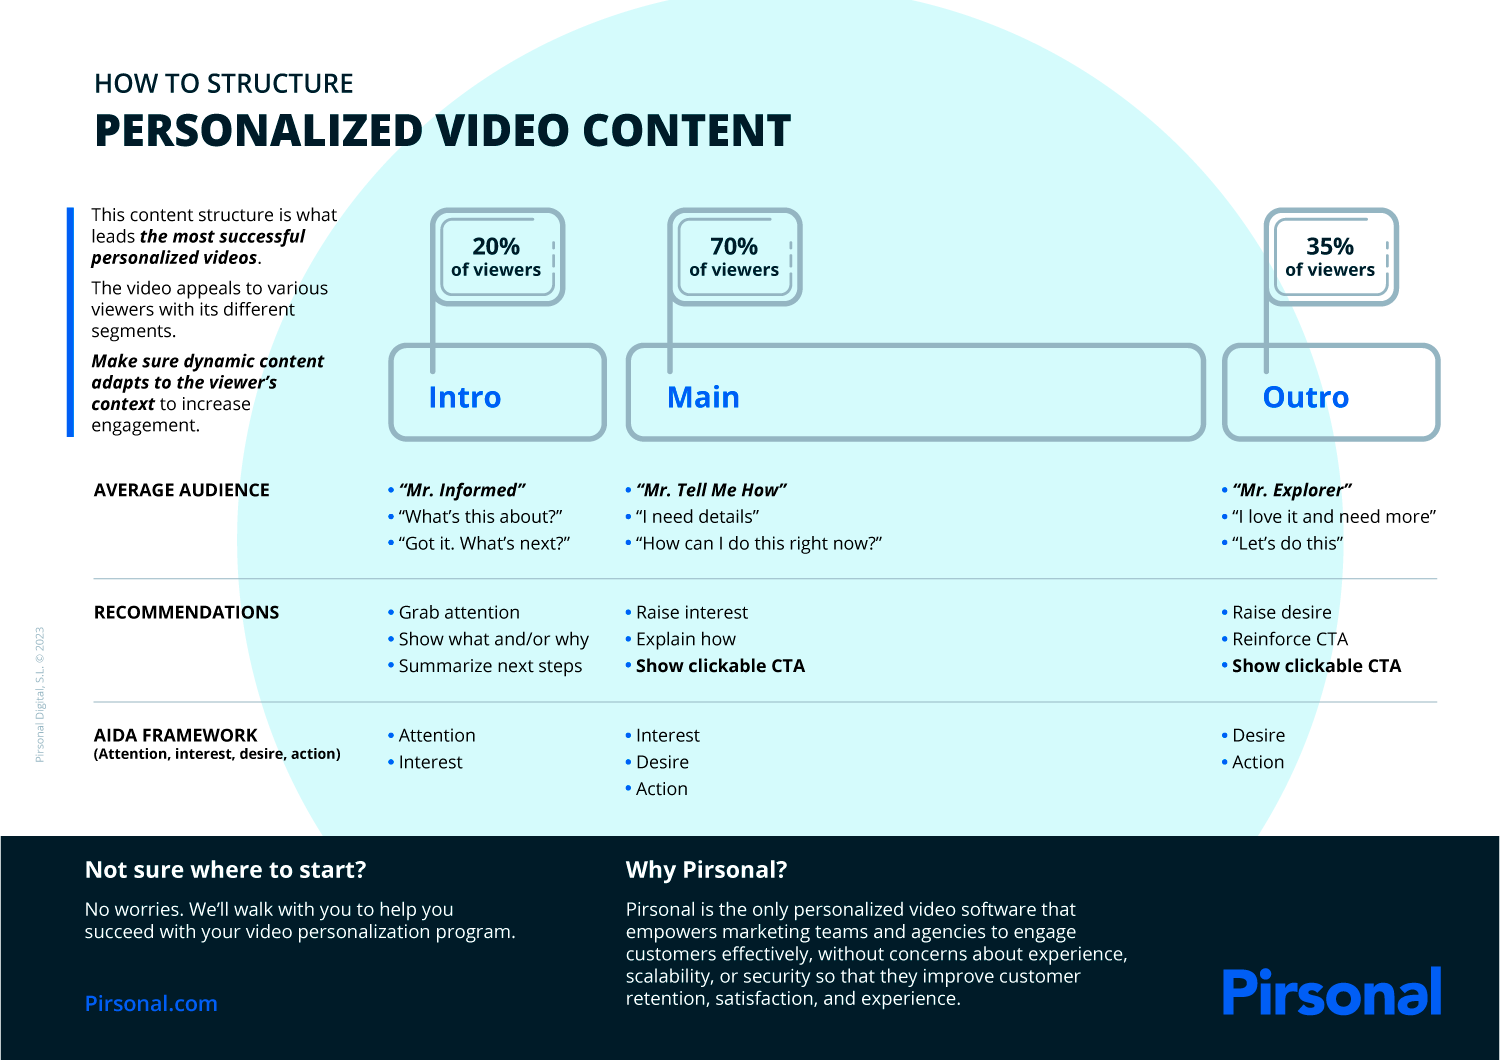 Pirsonal's Personalized Video Framework makes it easy to conceptualize and create personalized video content